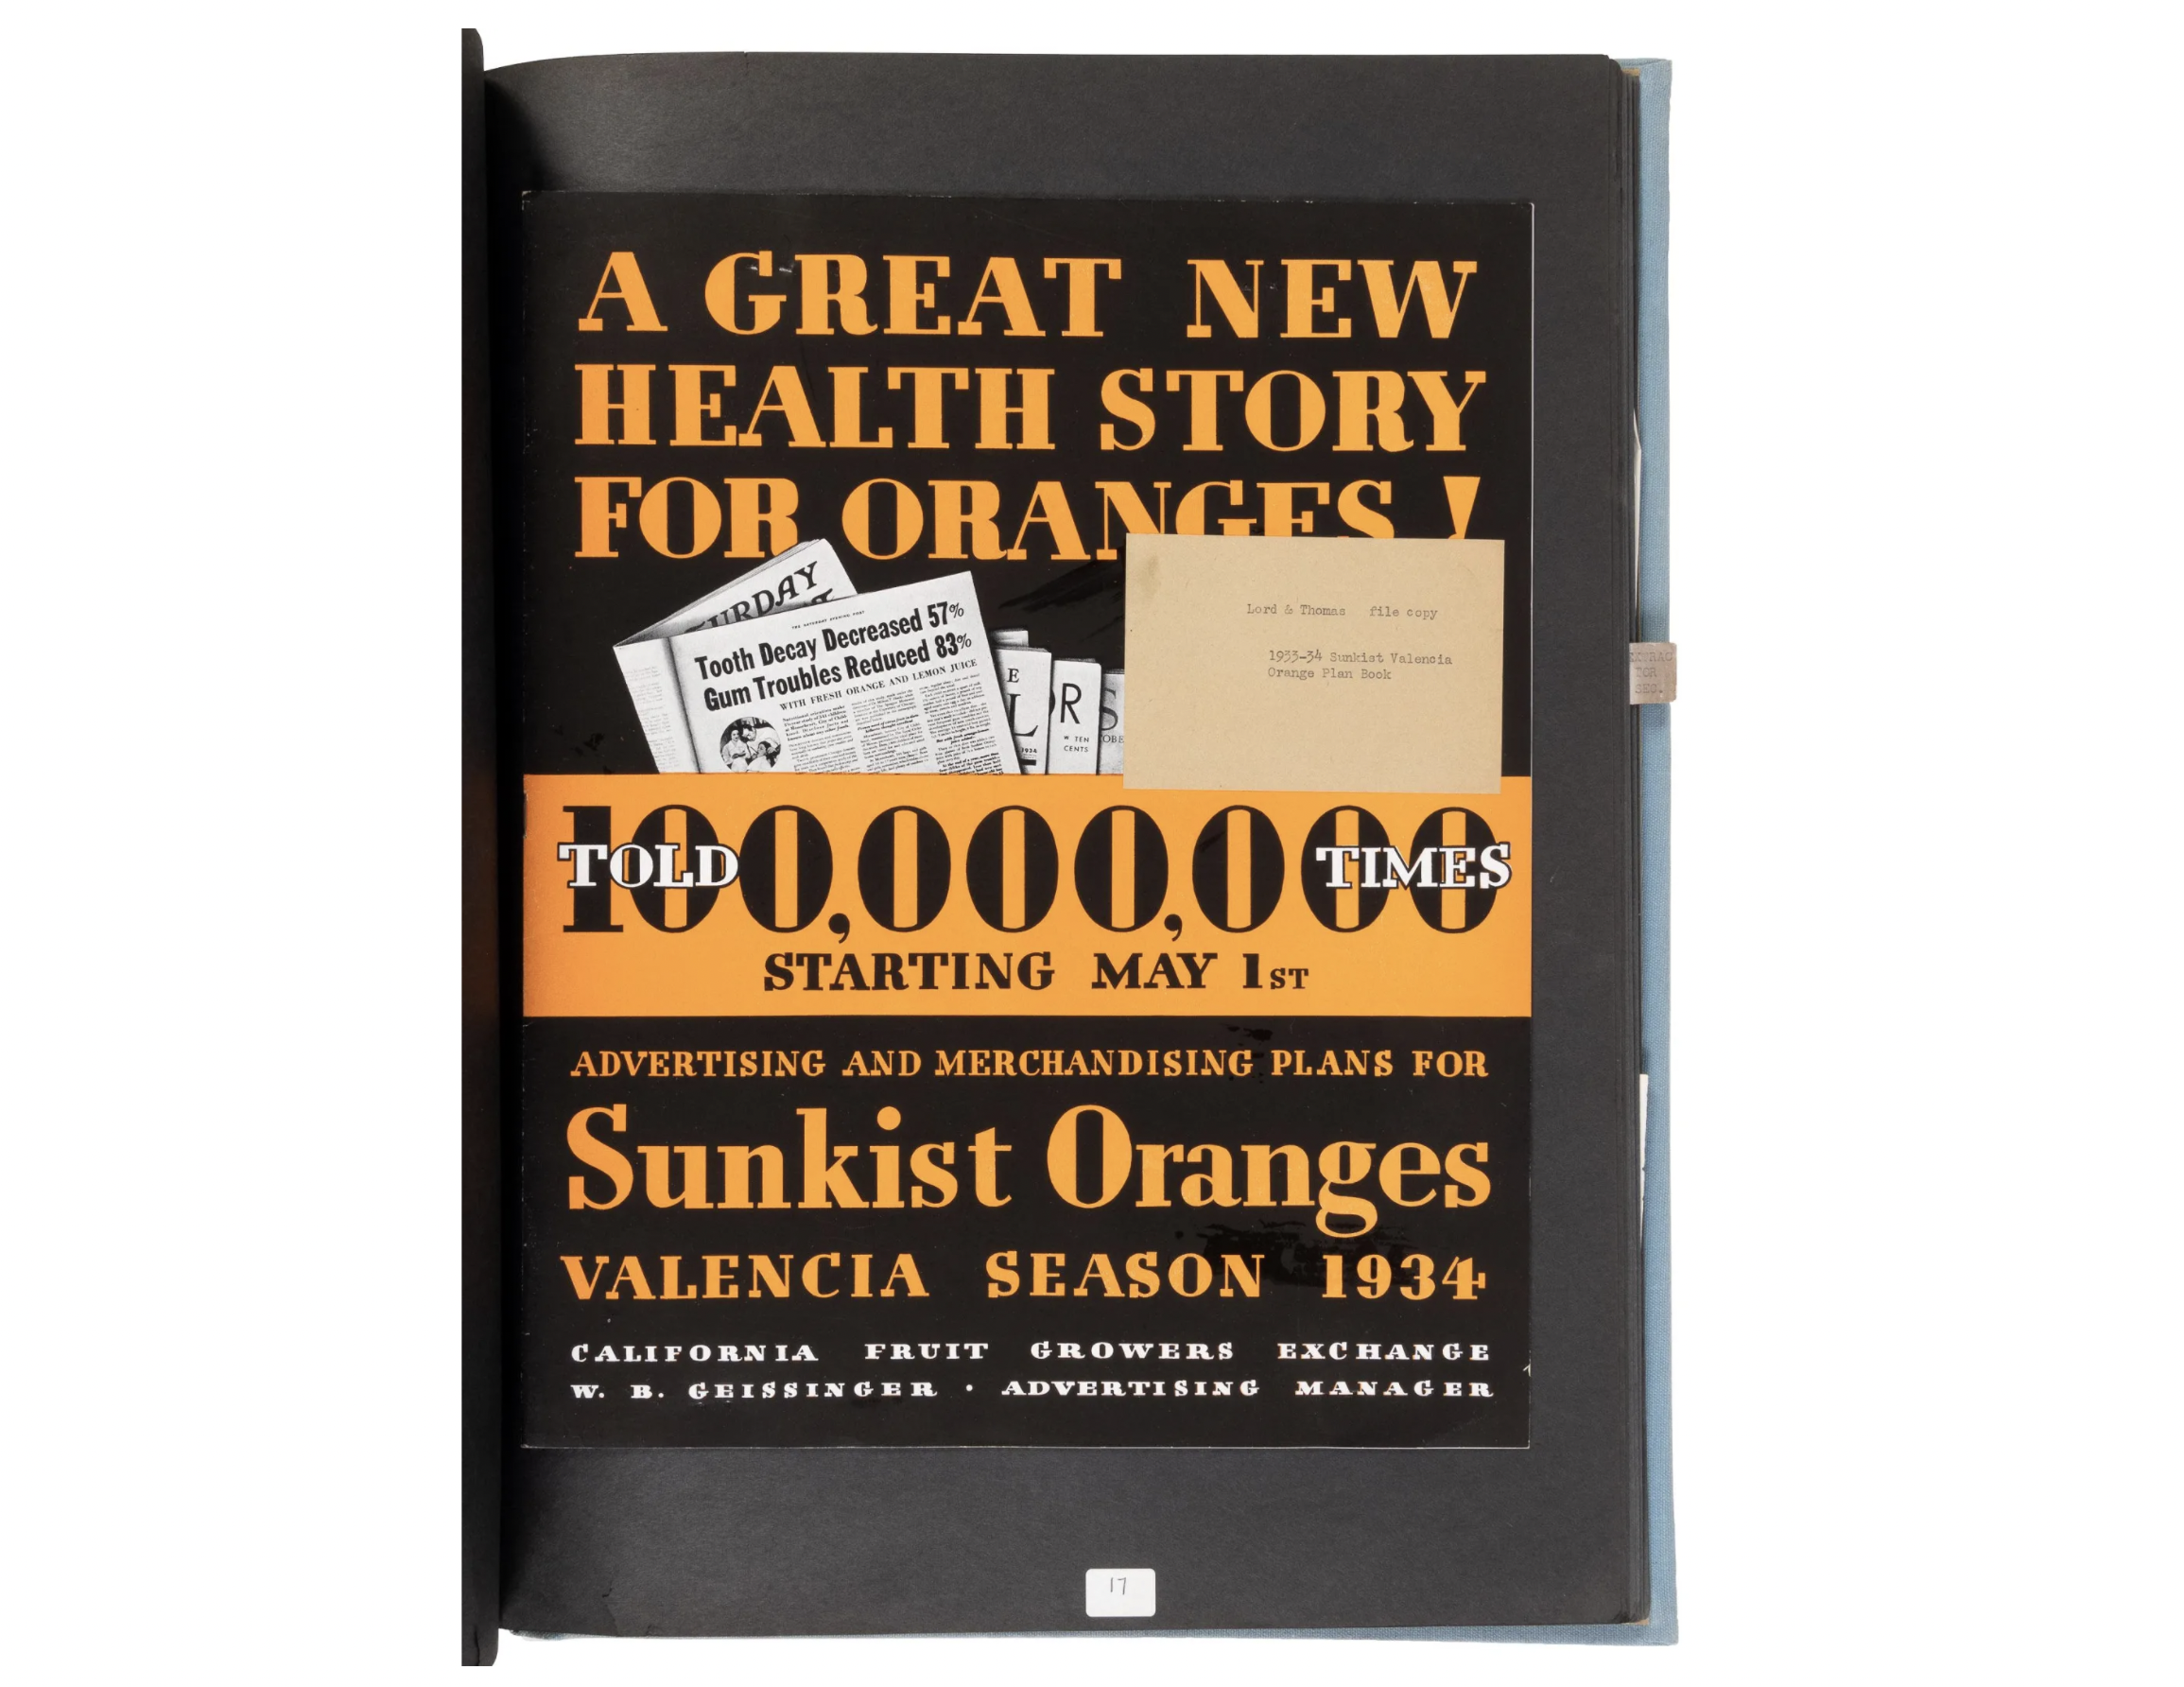 Advertising campaigns archive for Sunkist Corp., est. $10,000-$15,000